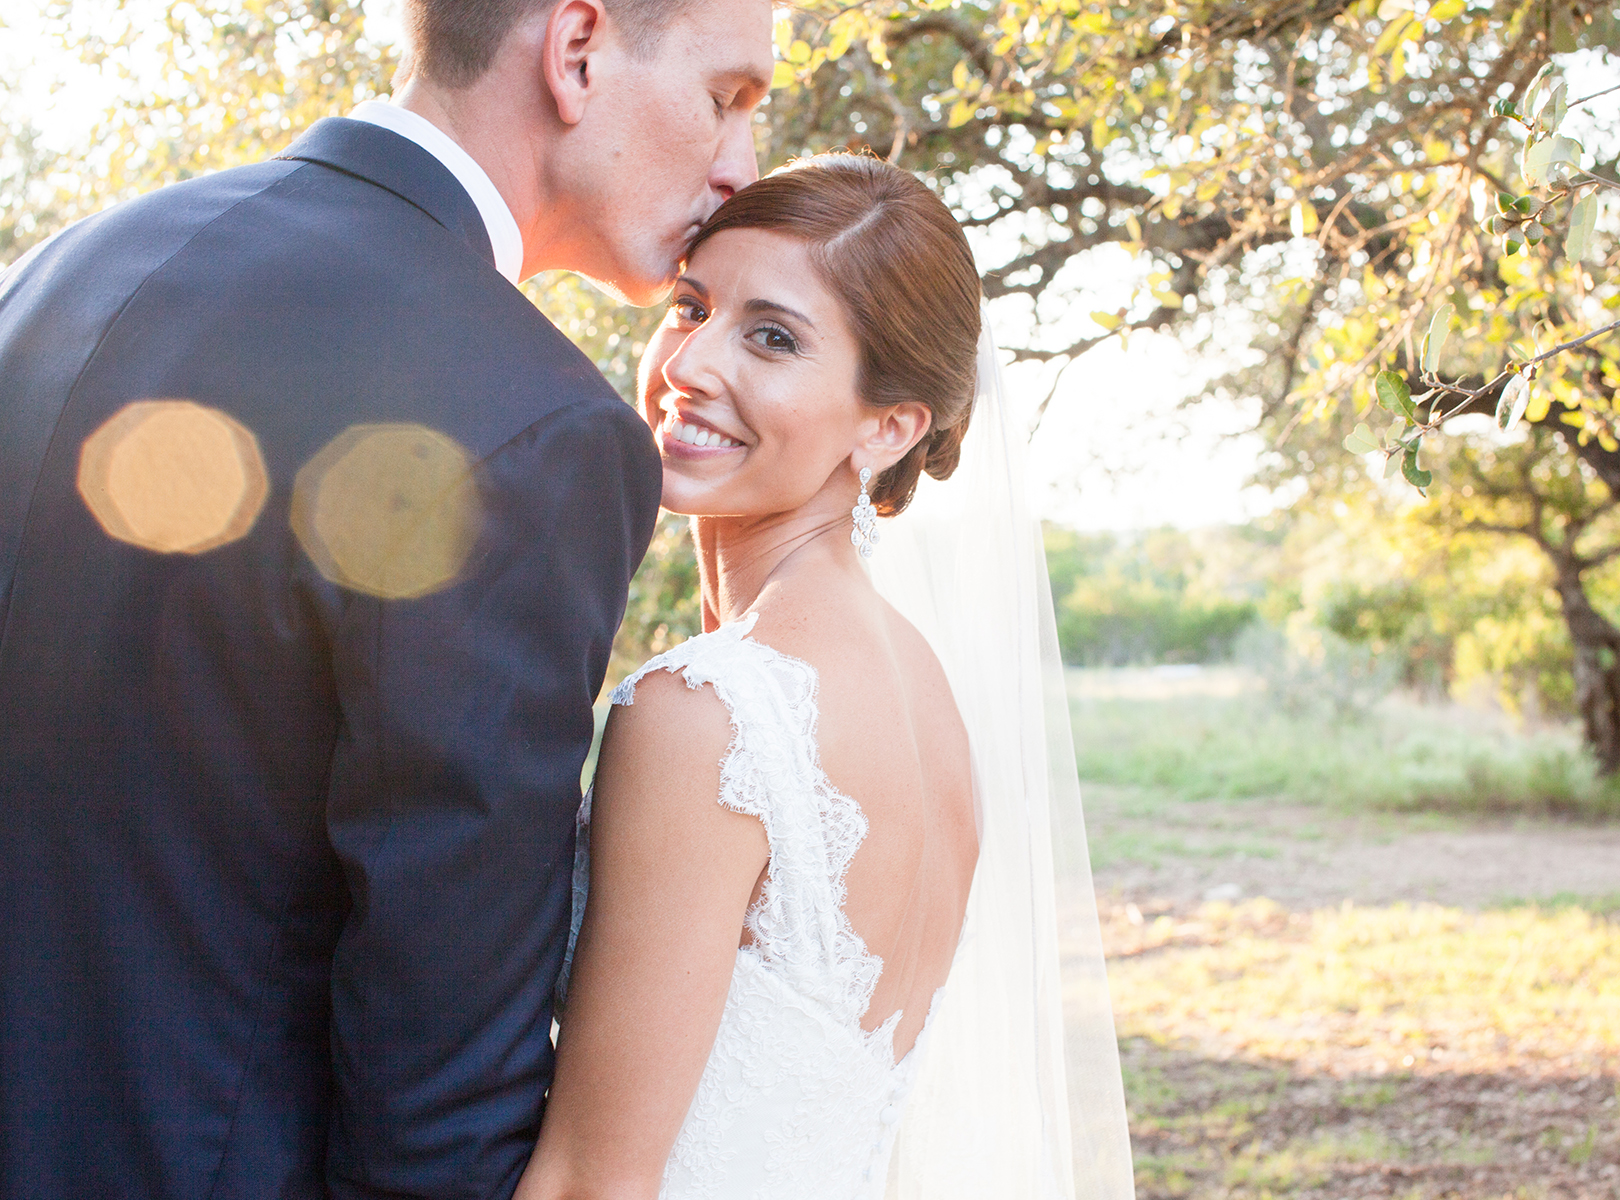 Vista West Ranch Wedding Photography, Dripping Springs Wedding Photography, Austin Weddings, Coordinate This, lacy bridal gown, backless wedding dress, bride and groom posing together in the setting sunlight, peaceful, Outdoor wedding, nature 